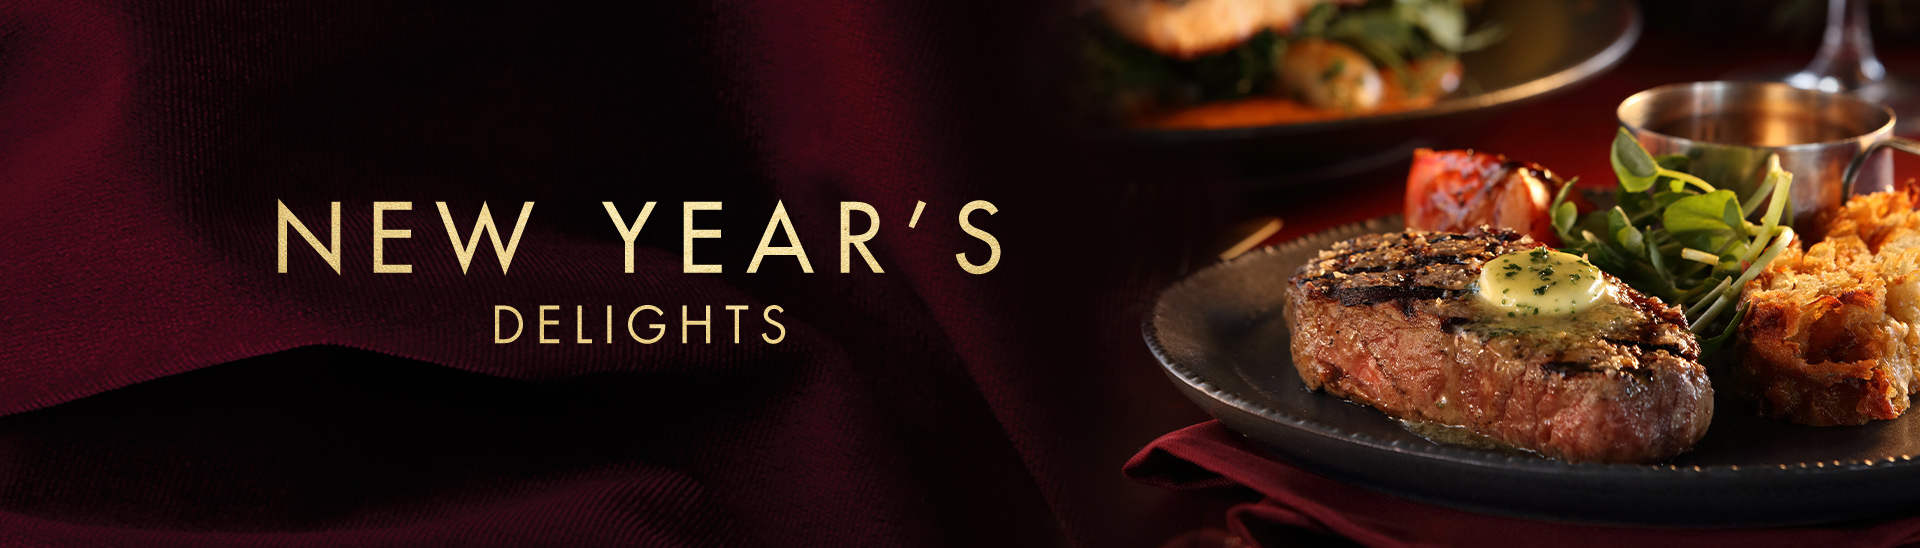 New Year’s Eve 2019 at Miller & Carter Cardiff Hayes